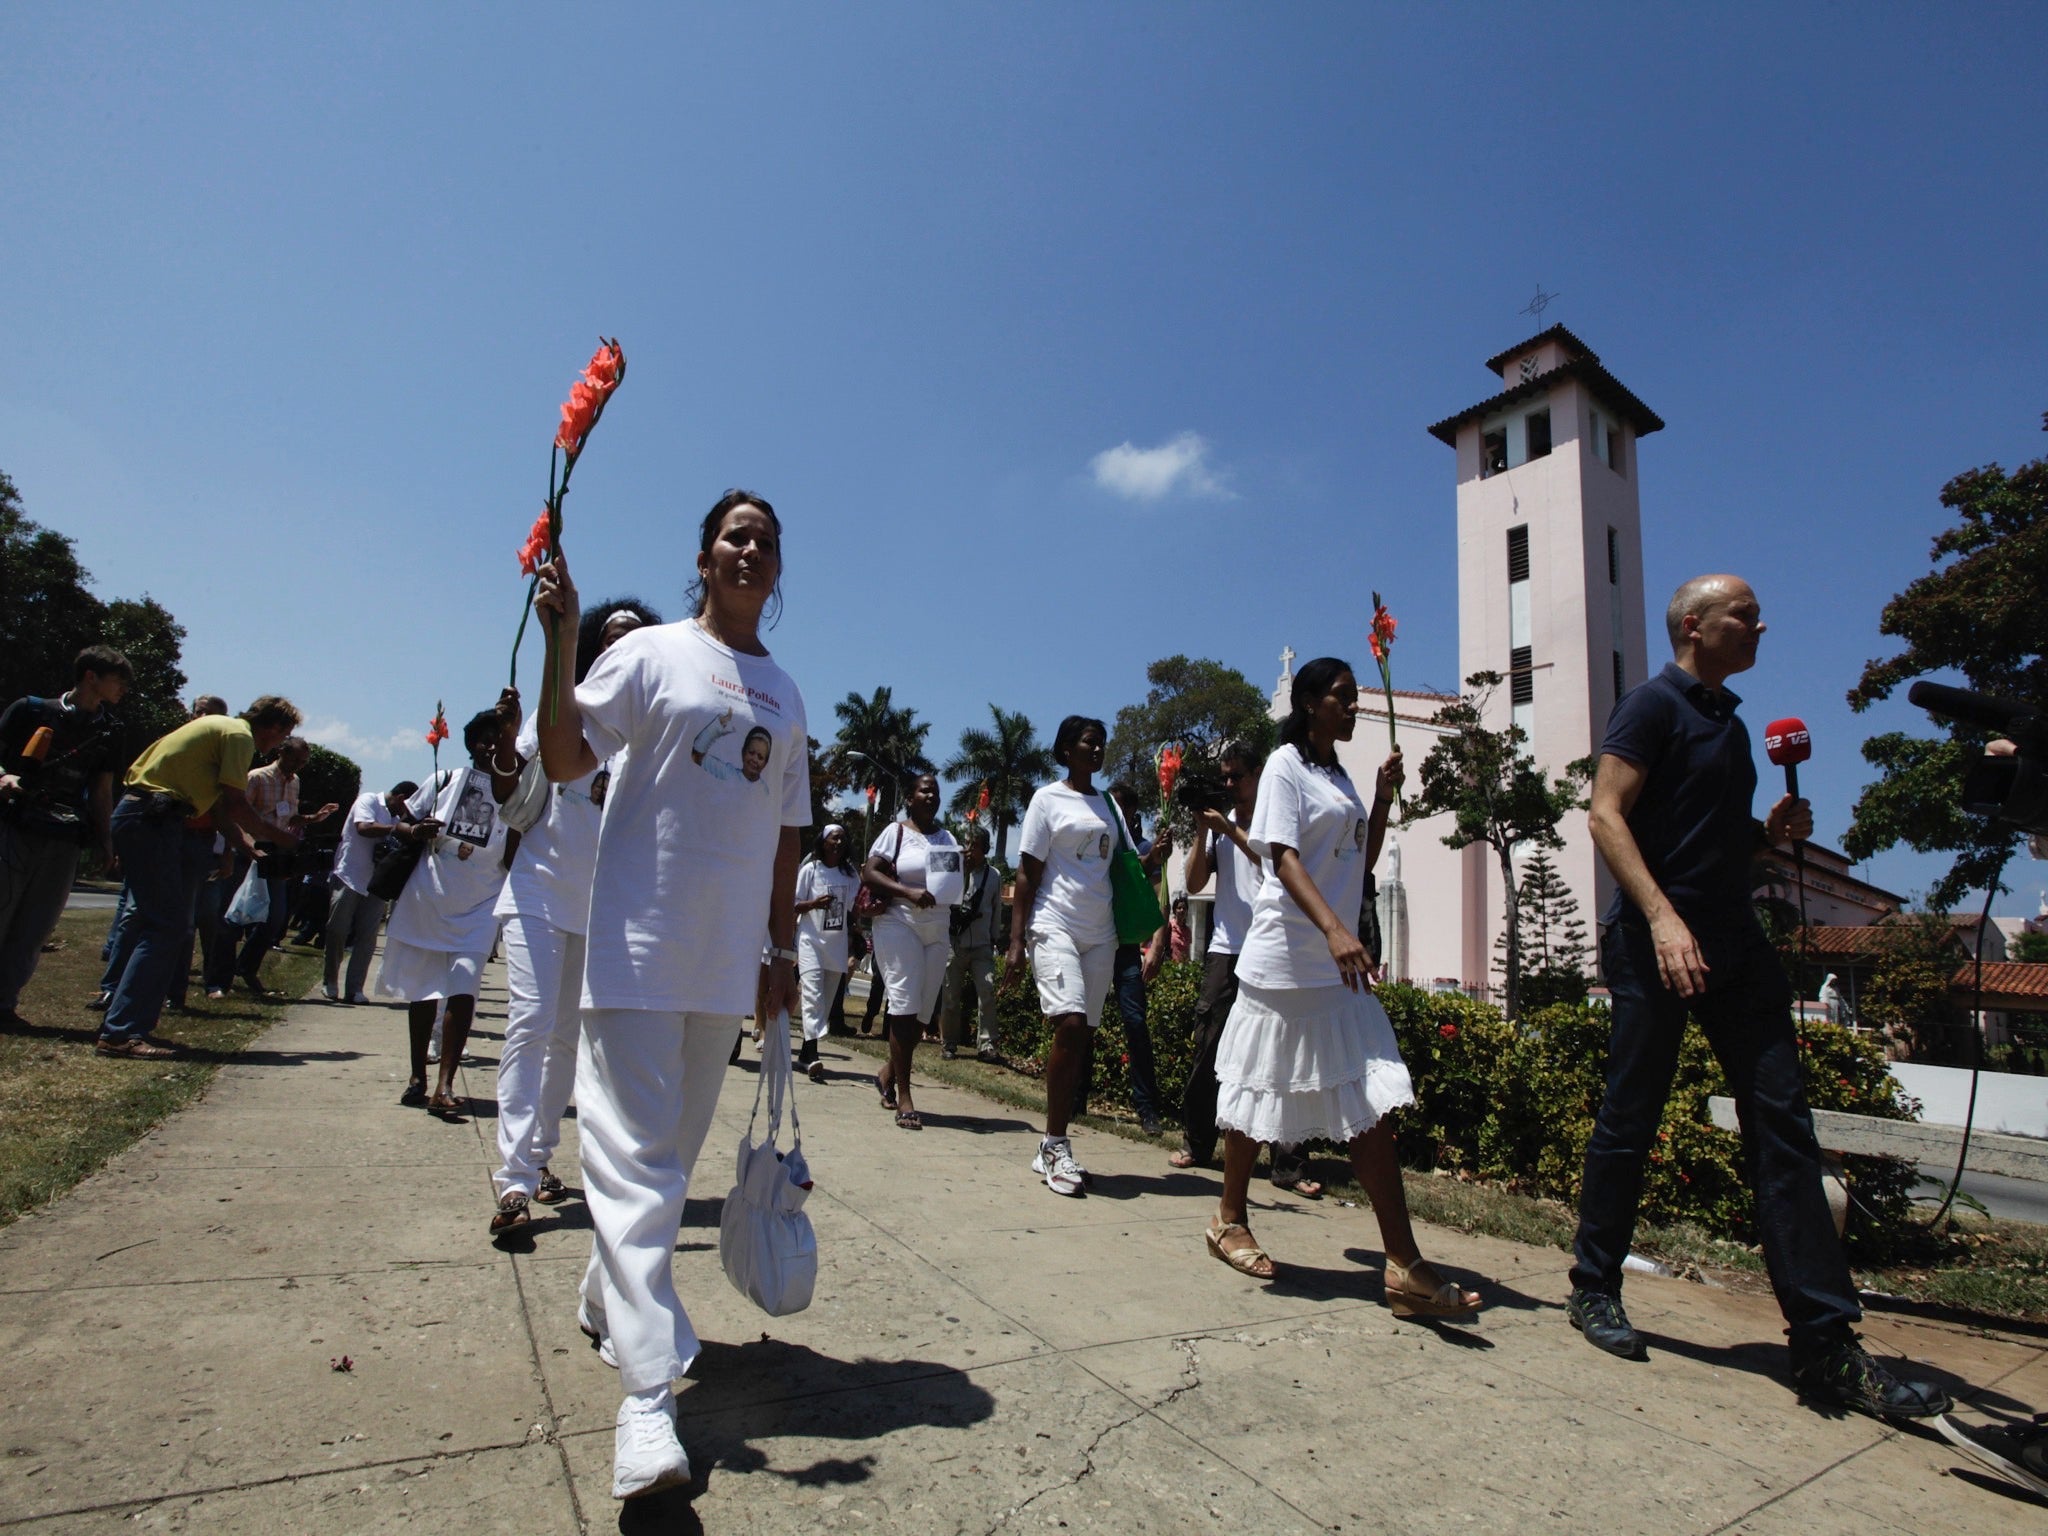 The Ladies in White have long called for the release of dissidents